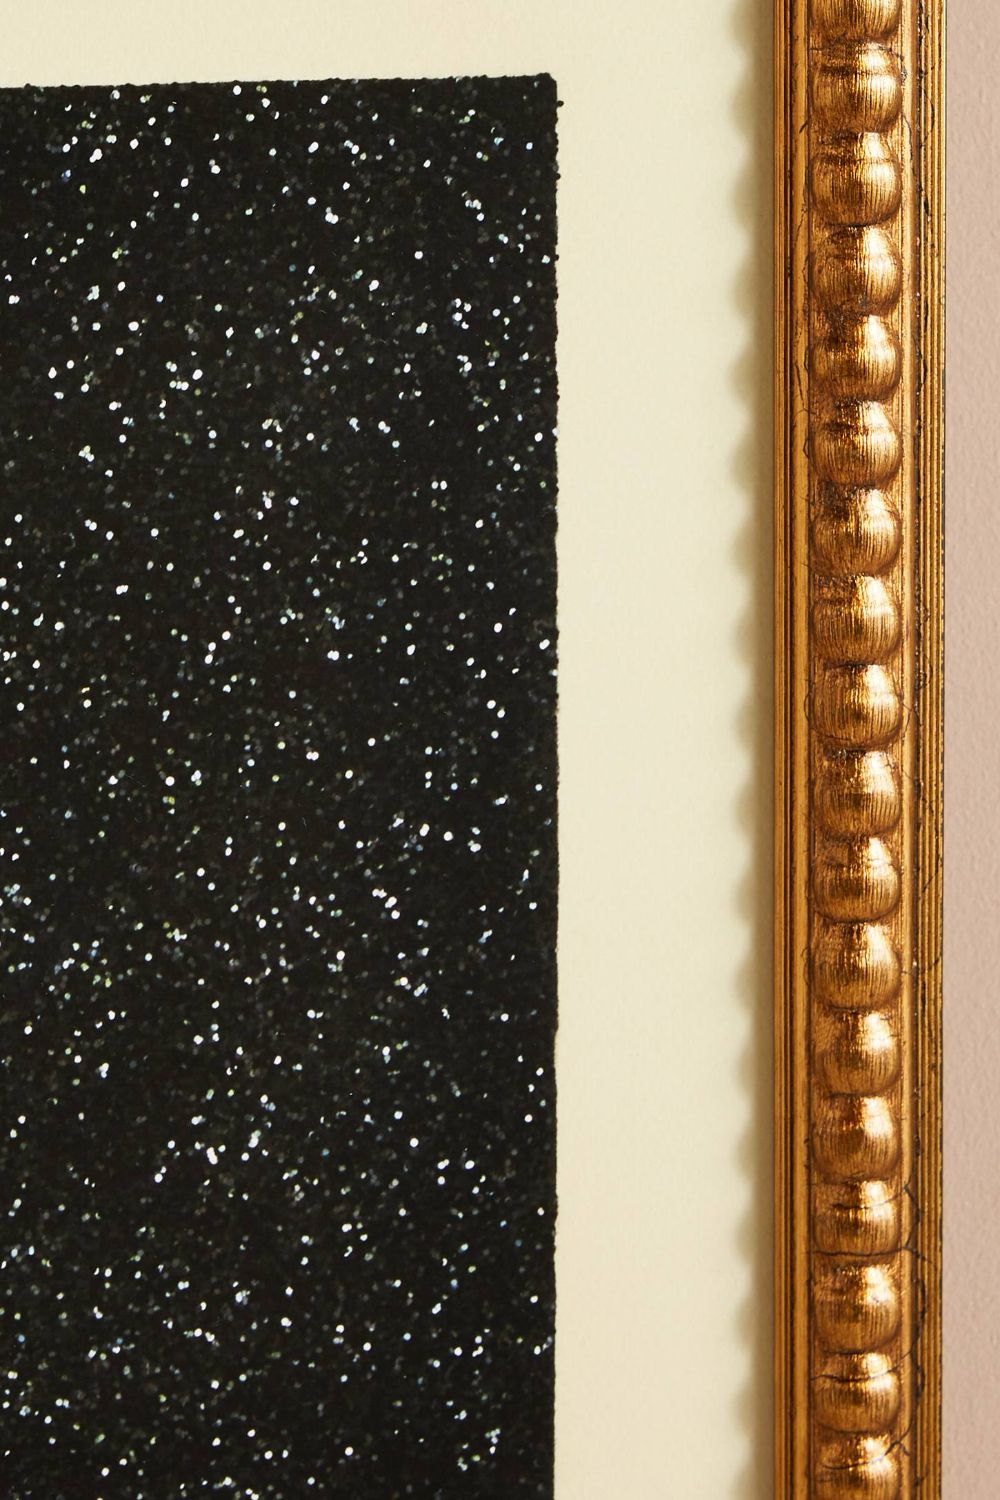 Black Glitter Wall Art | Glitter Wall Art, Glitter Wall Within Most Popular Glitter Wall Art (Gallery 19 of 20)